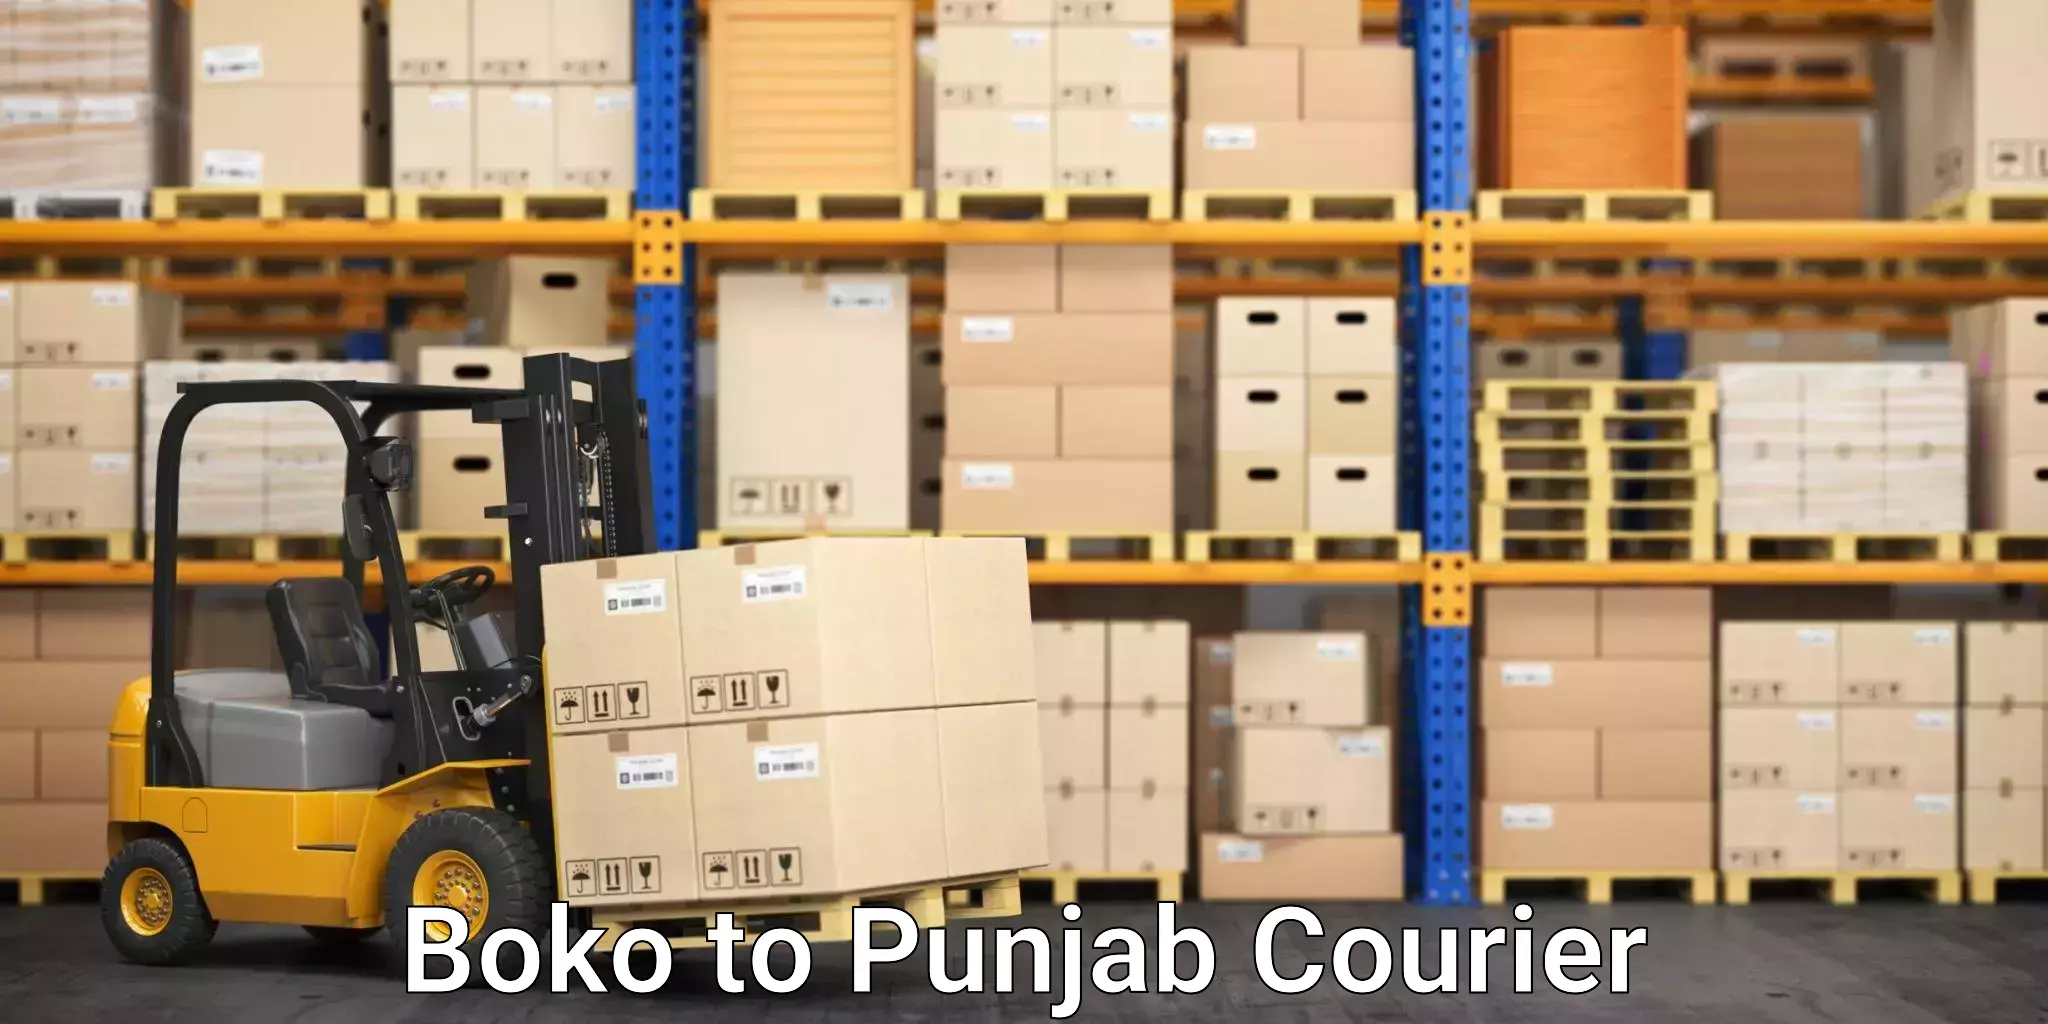 Automated parcel services Boko to Punjab